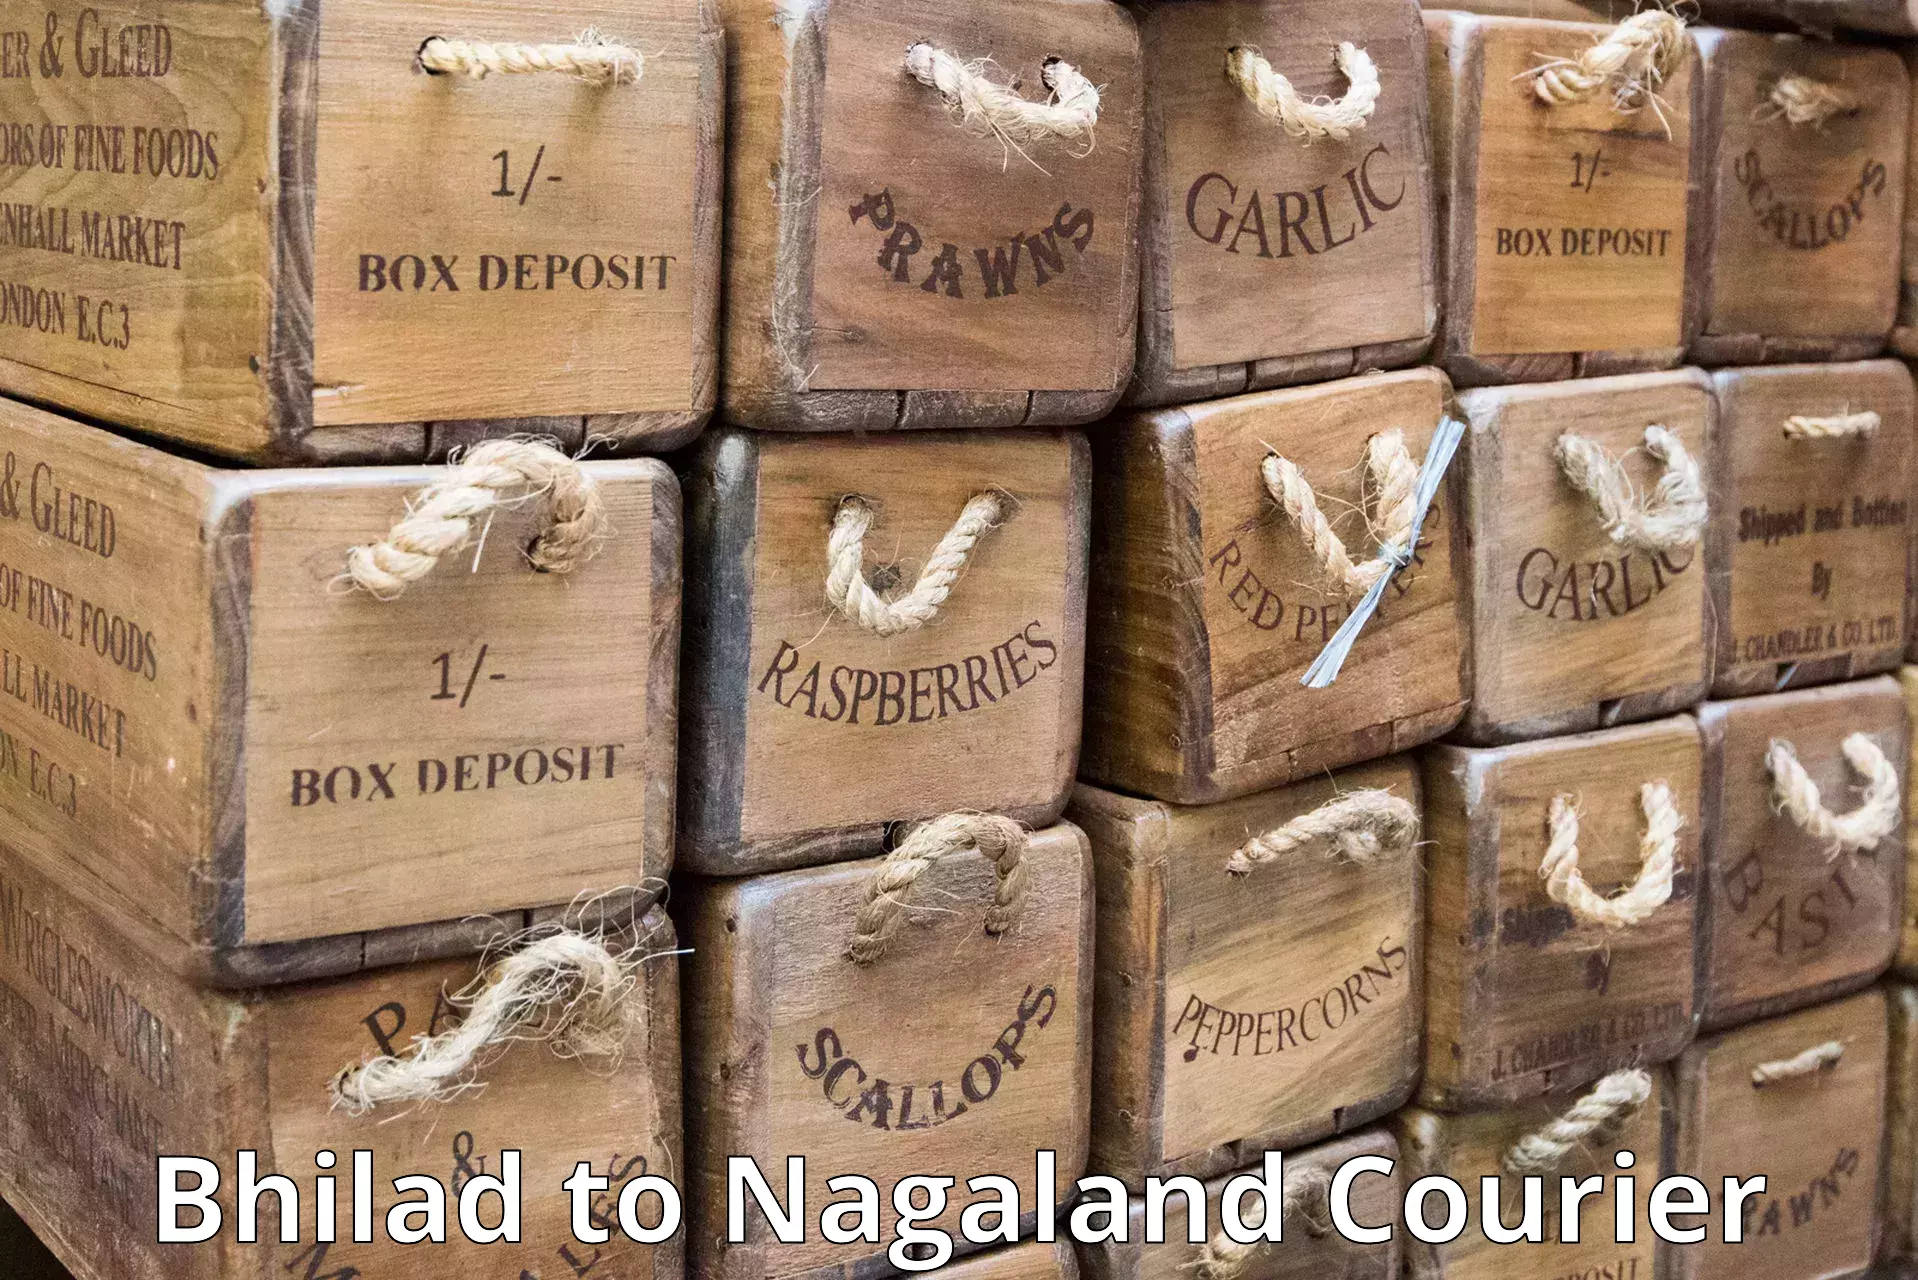 Local delivery service Bhilad to Nagaland